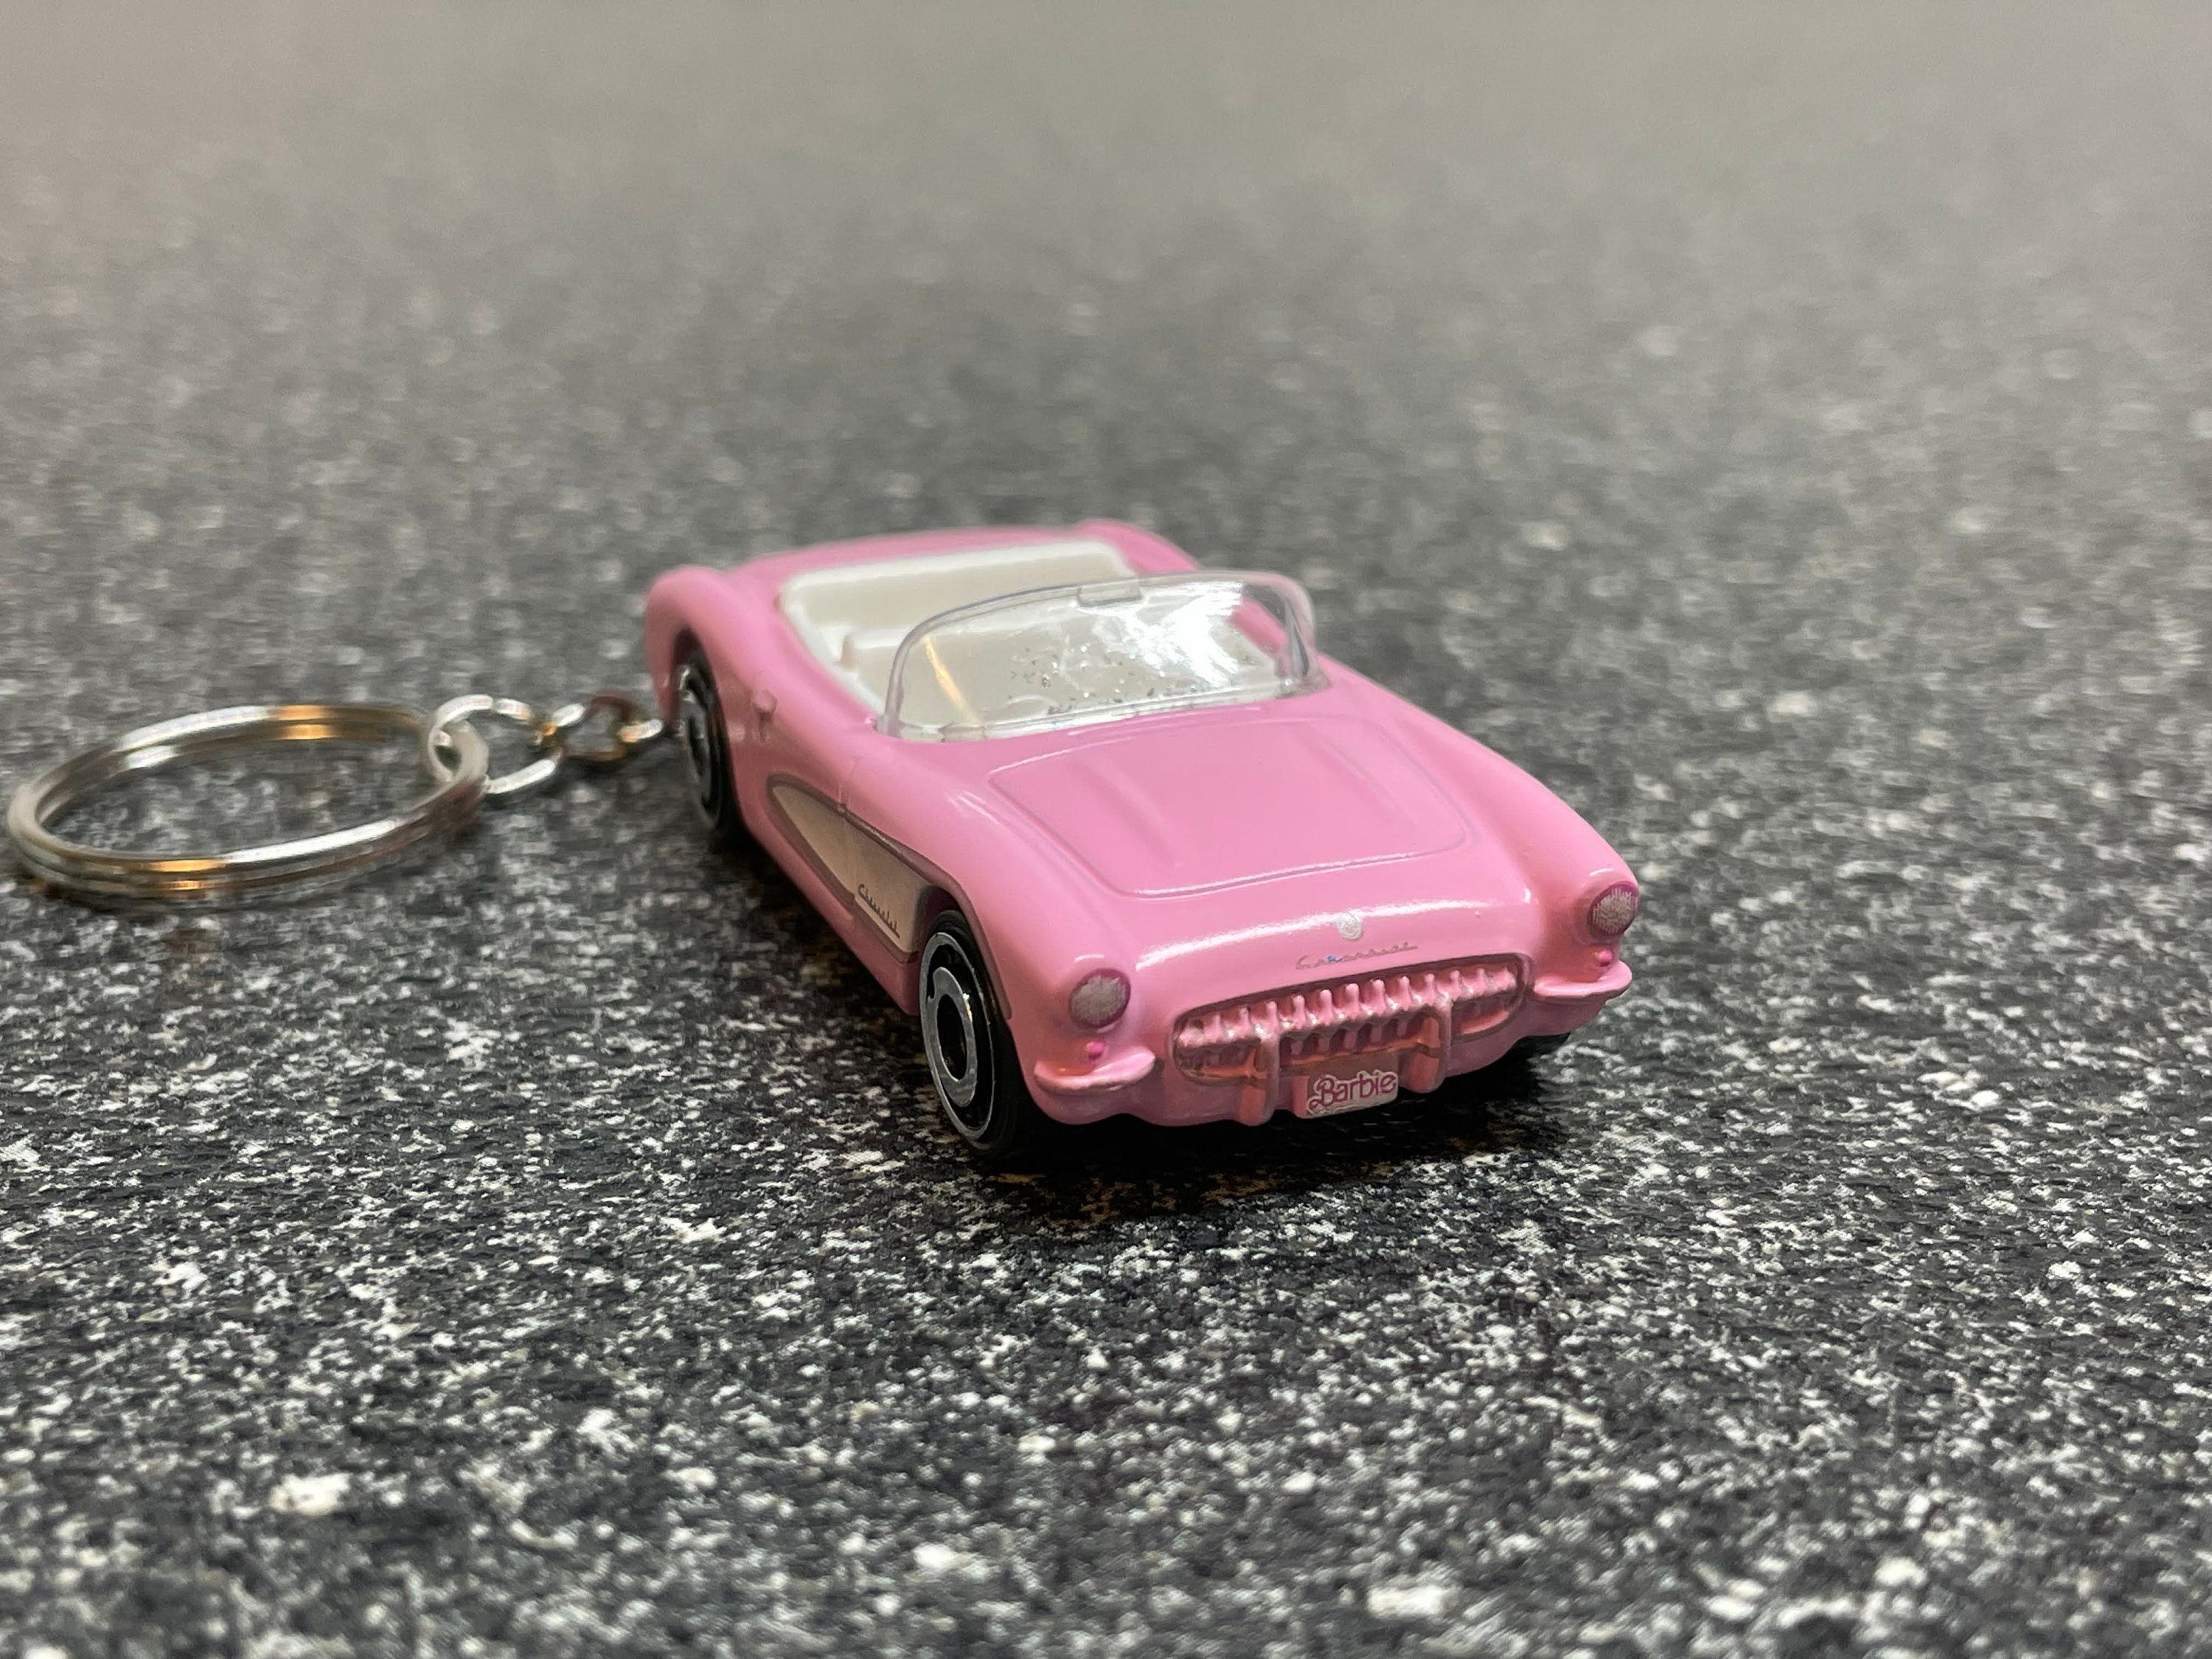 Car accessories that will Barbie-fy your Toyota